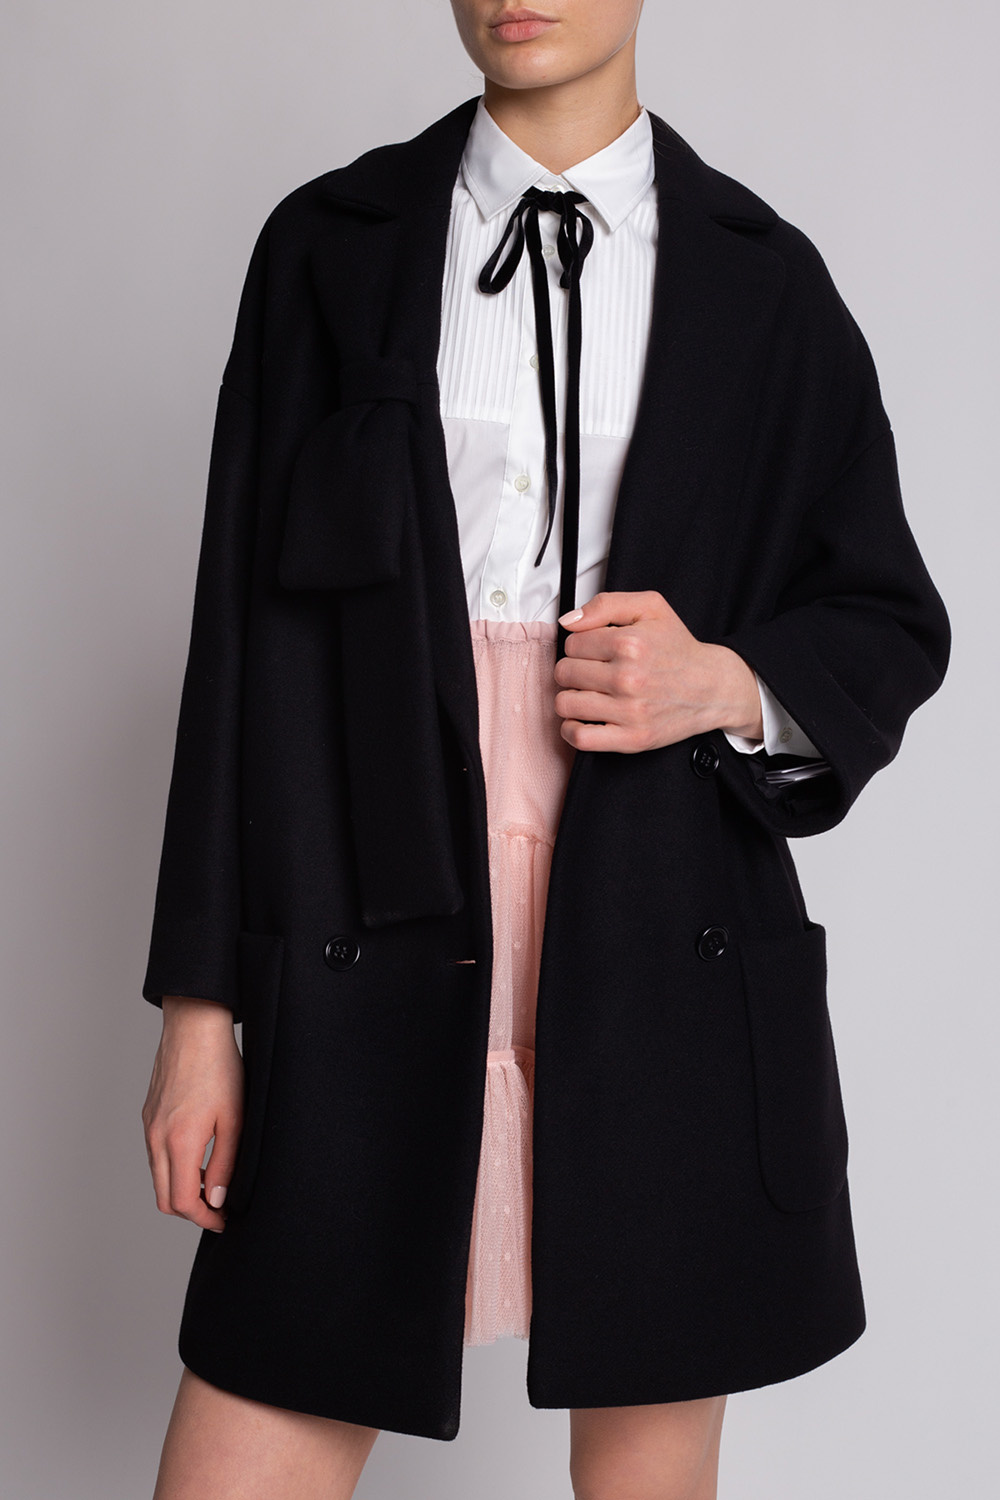 Red Valentino Coat with decorative sleeves